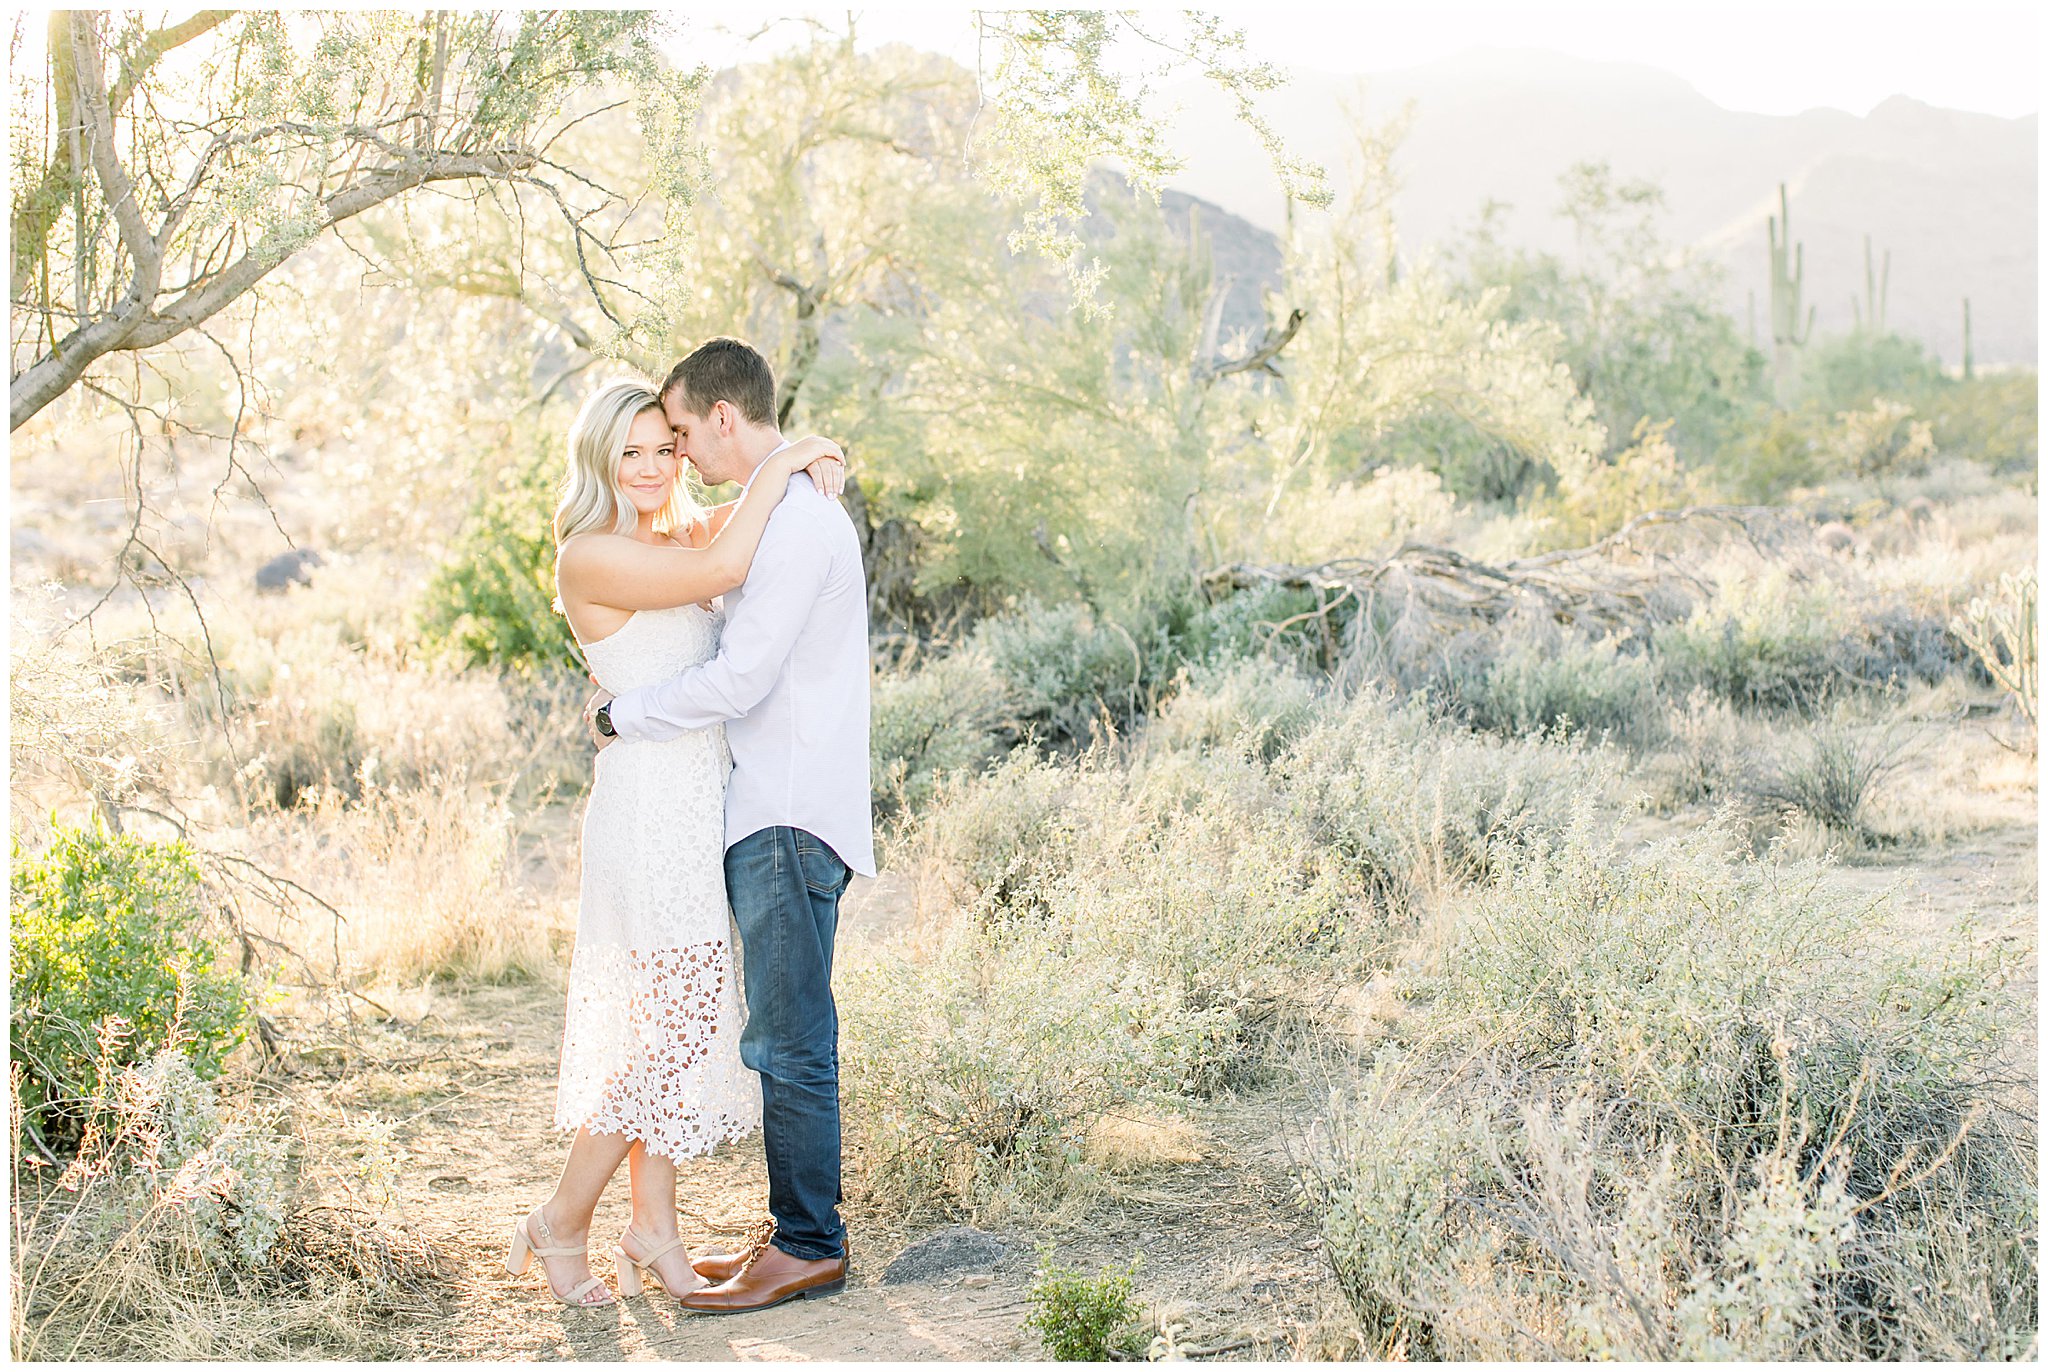 Desert engagement Pictures, Phoenix Desert Engagement Pictures, Sunset engagement Pictures, What to wear for an engagement Picture, Couple embracing, Champagne during engagement session, Champagne engagement Pictures